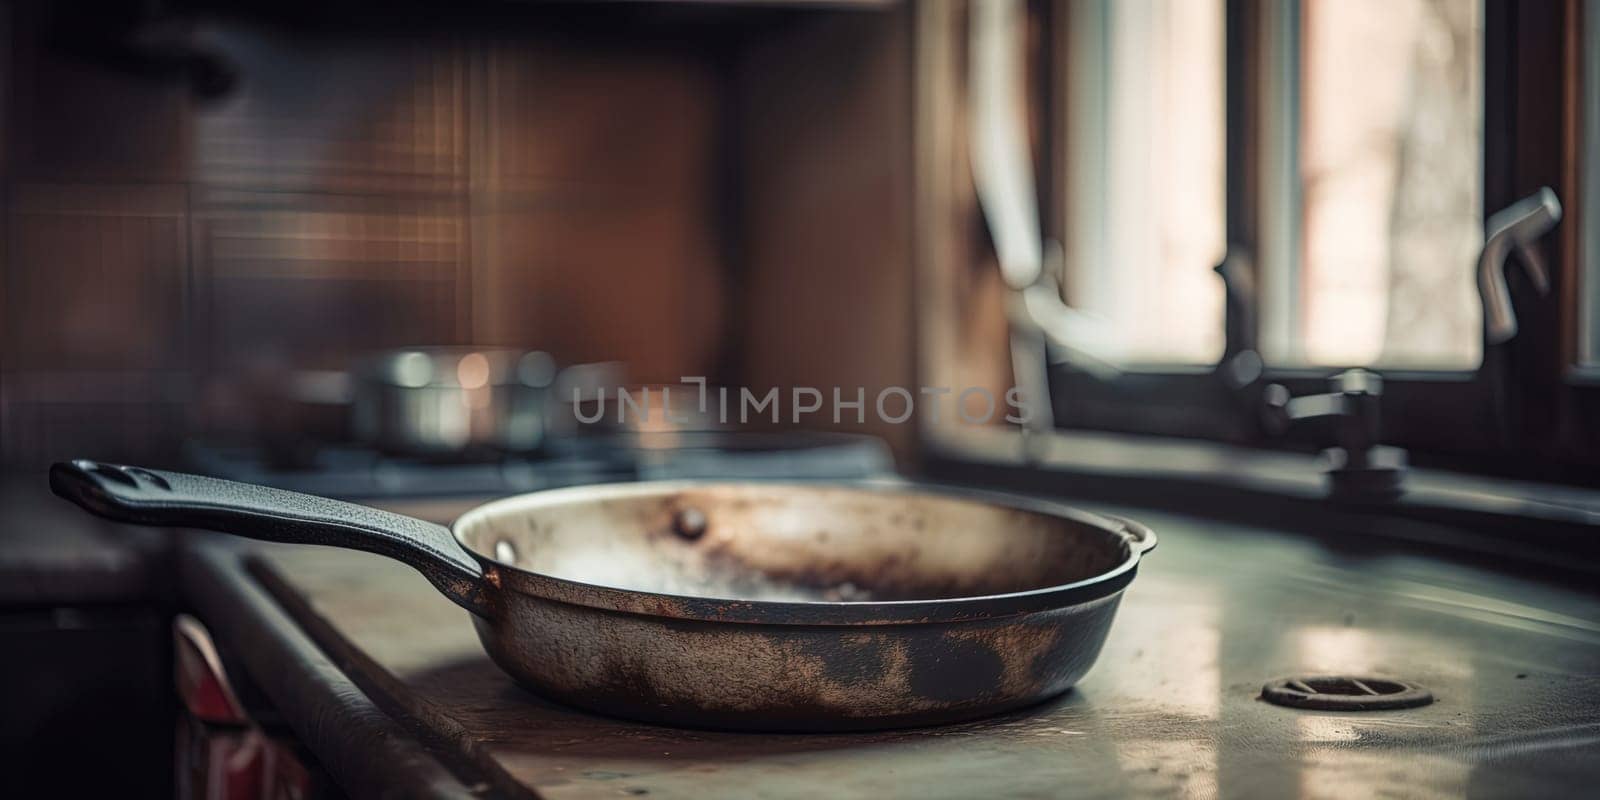 The old, rusty saucepan sat empty in the home kitchen pan. by tan4ikk1